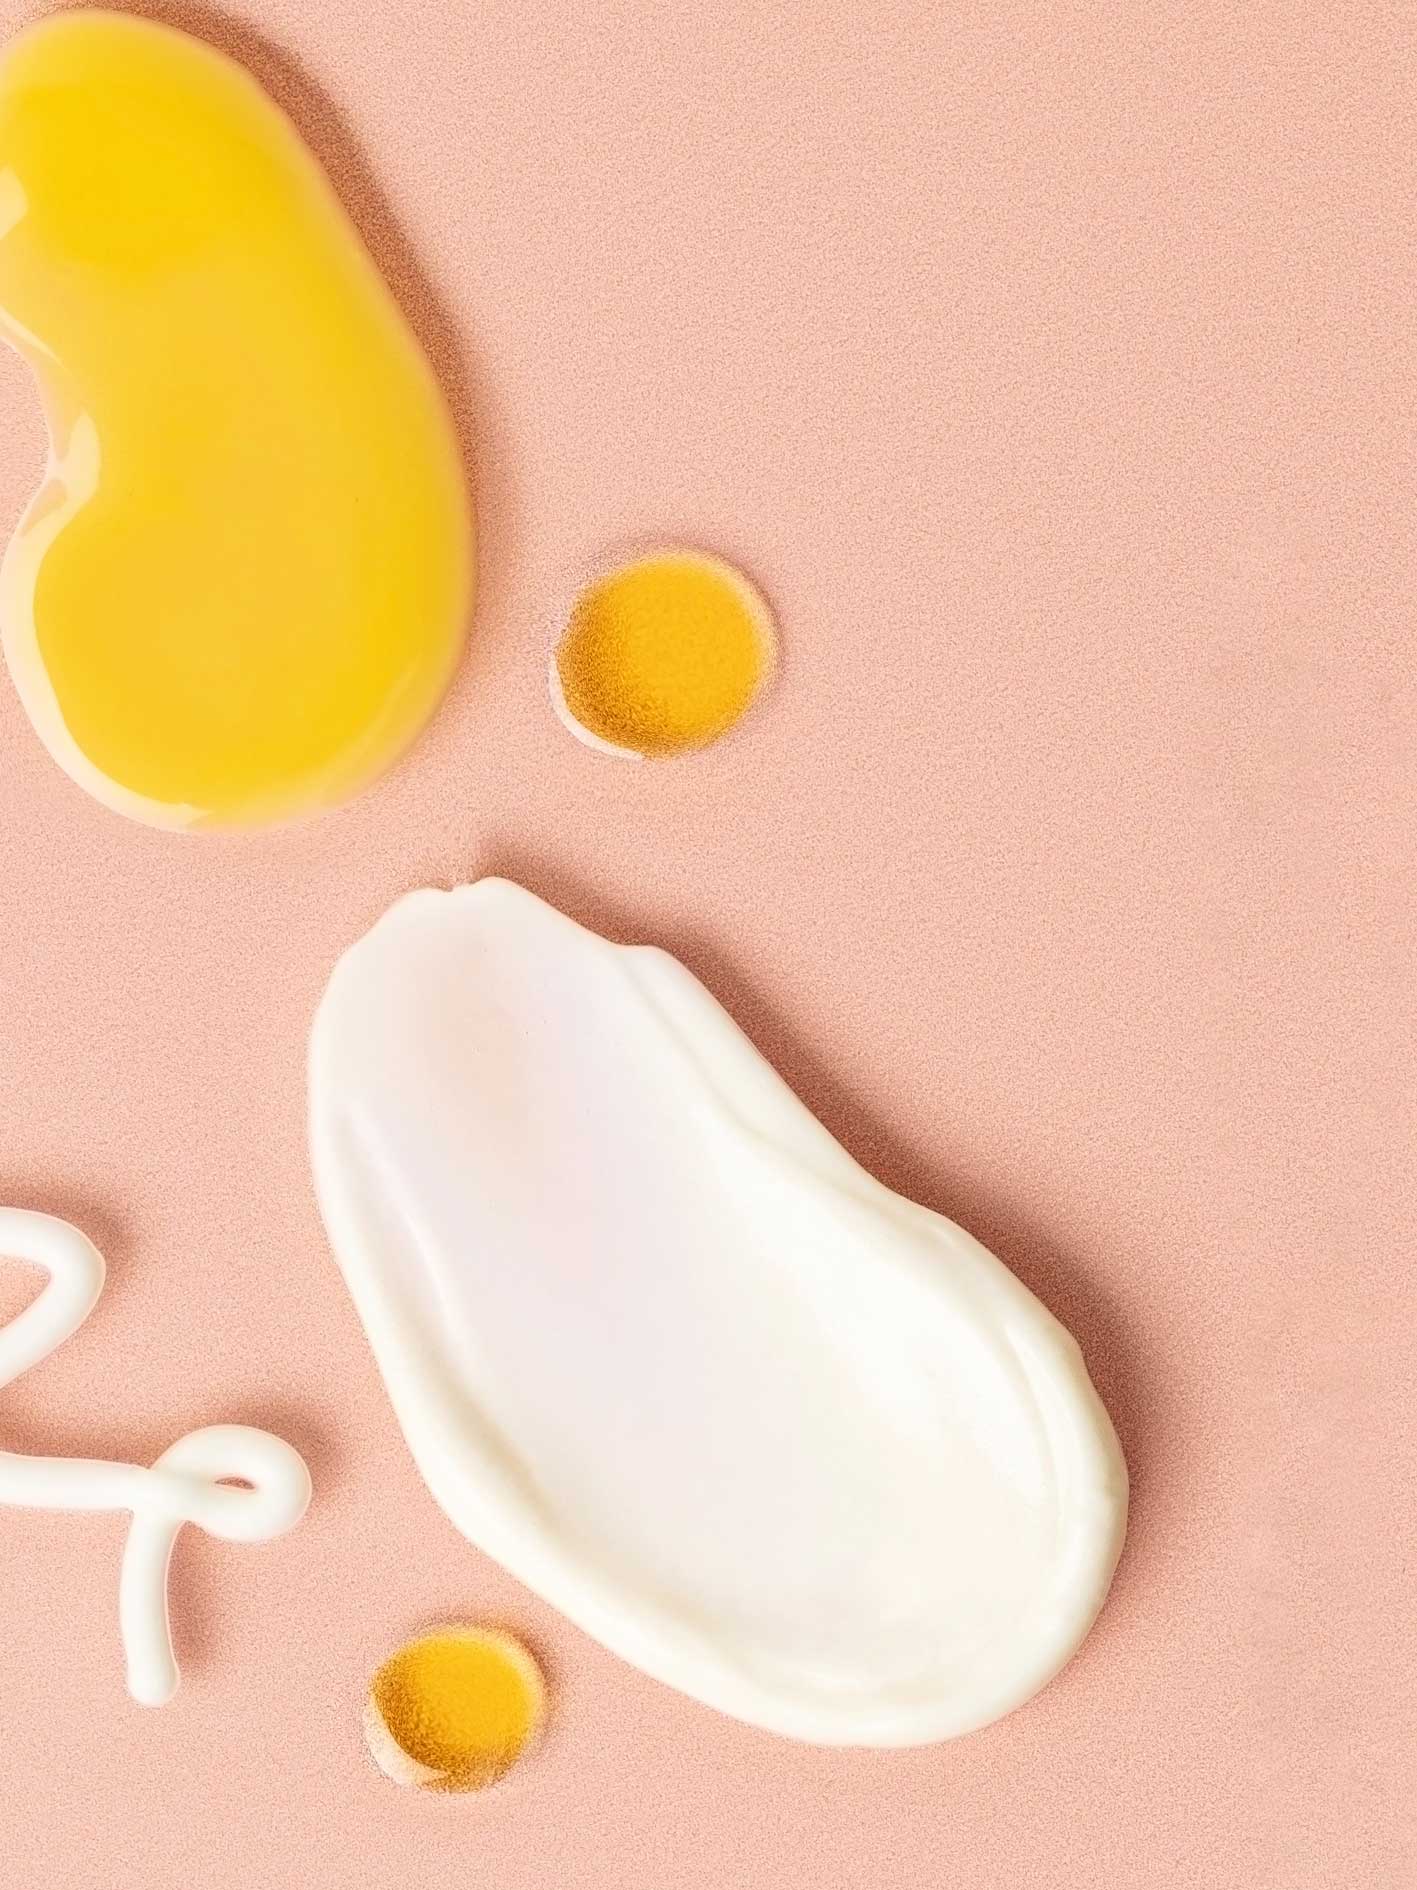 YOUR SKINCARE QUESTIONS ANSWERED